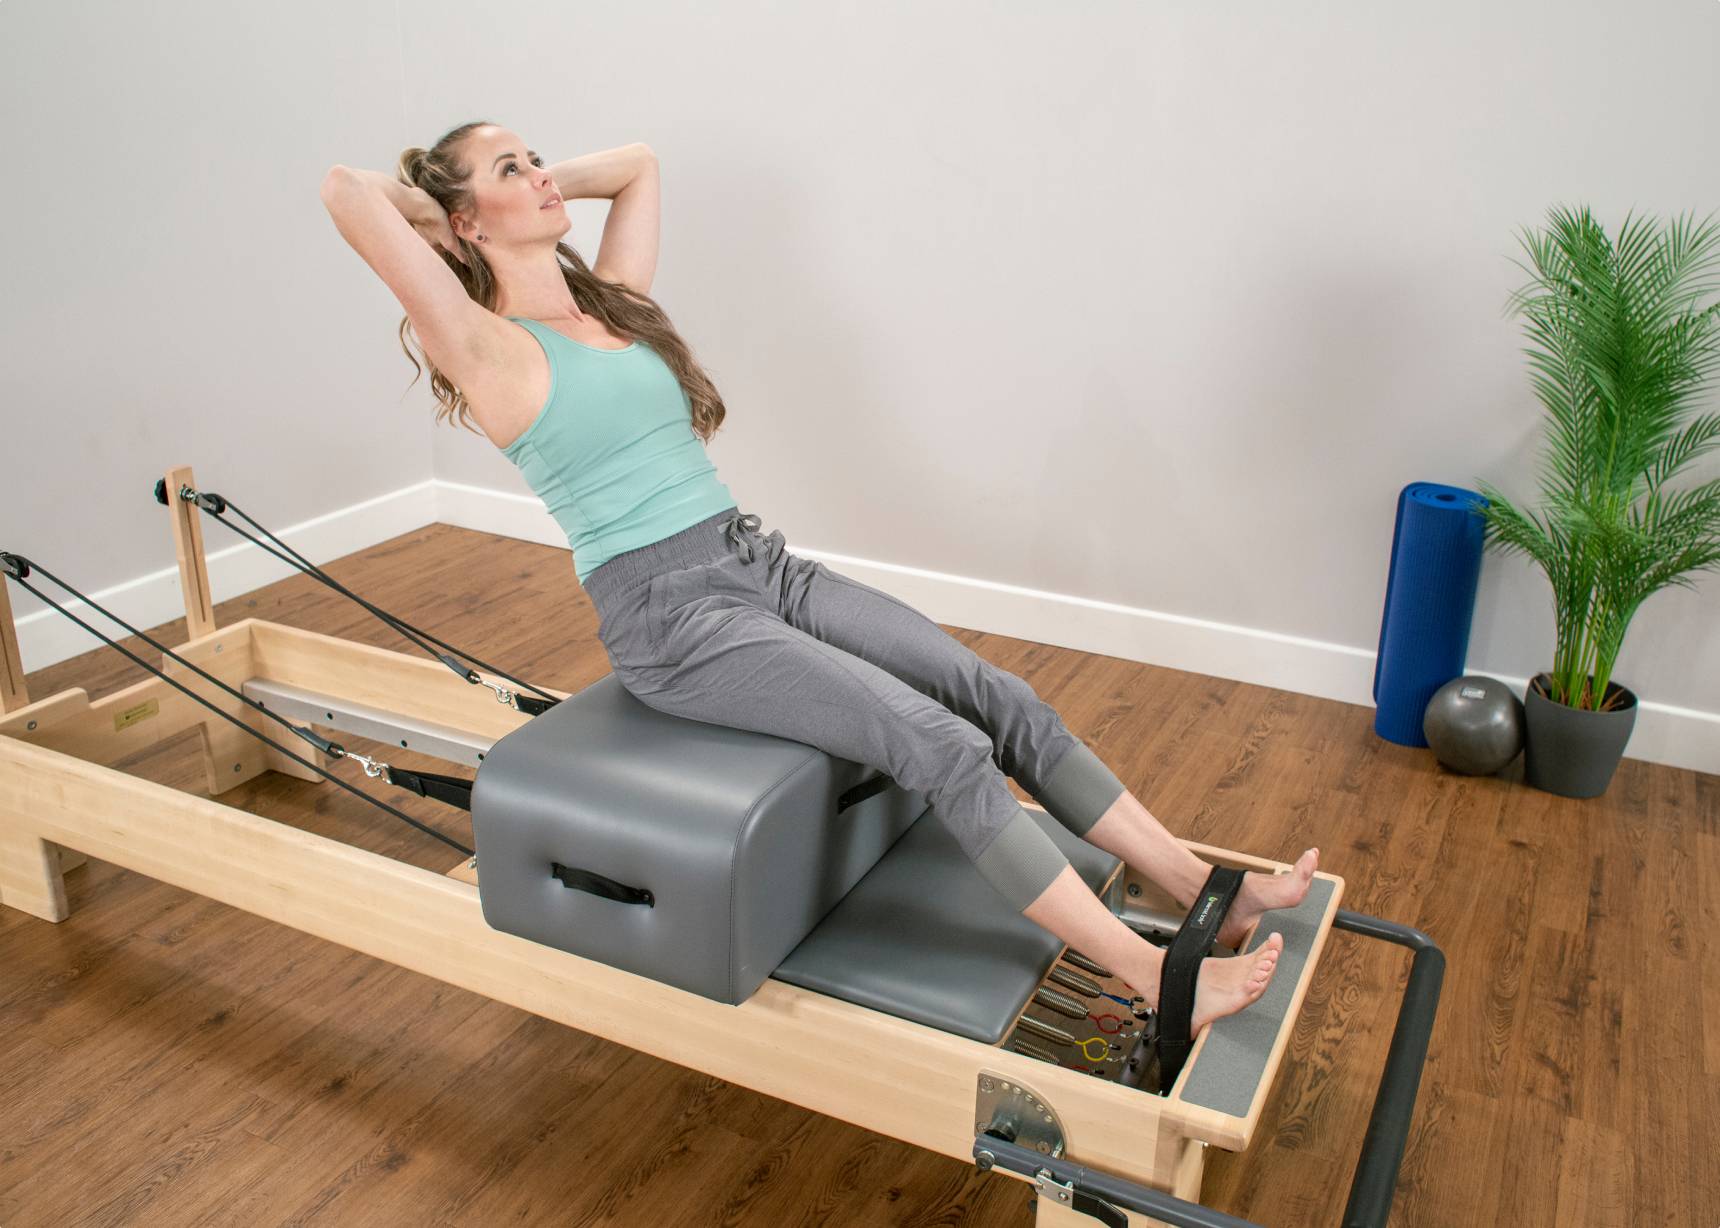  SENDIAN Balanced Body Pilates Box for Reformer，Pilates Reformer  Box for Exercises that Improve Range of Motion and Flexibility，Can be Used  Independently (Gray) : Sports & Outdoors